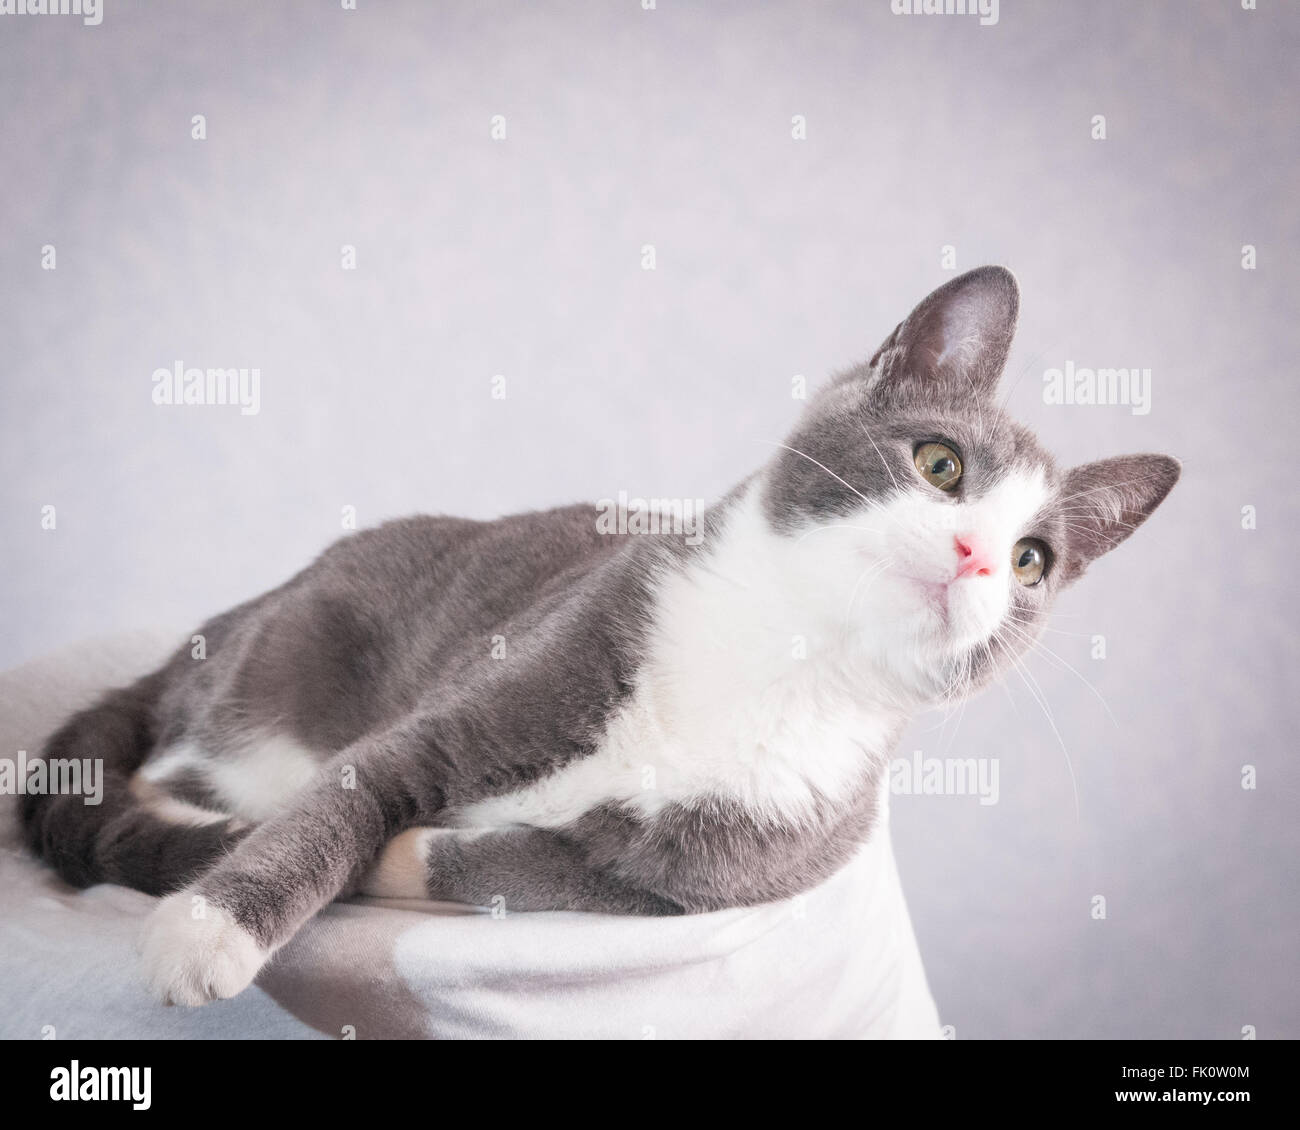 A domestic short haired cat lounges holding his gaze on camera right. Stock Photo